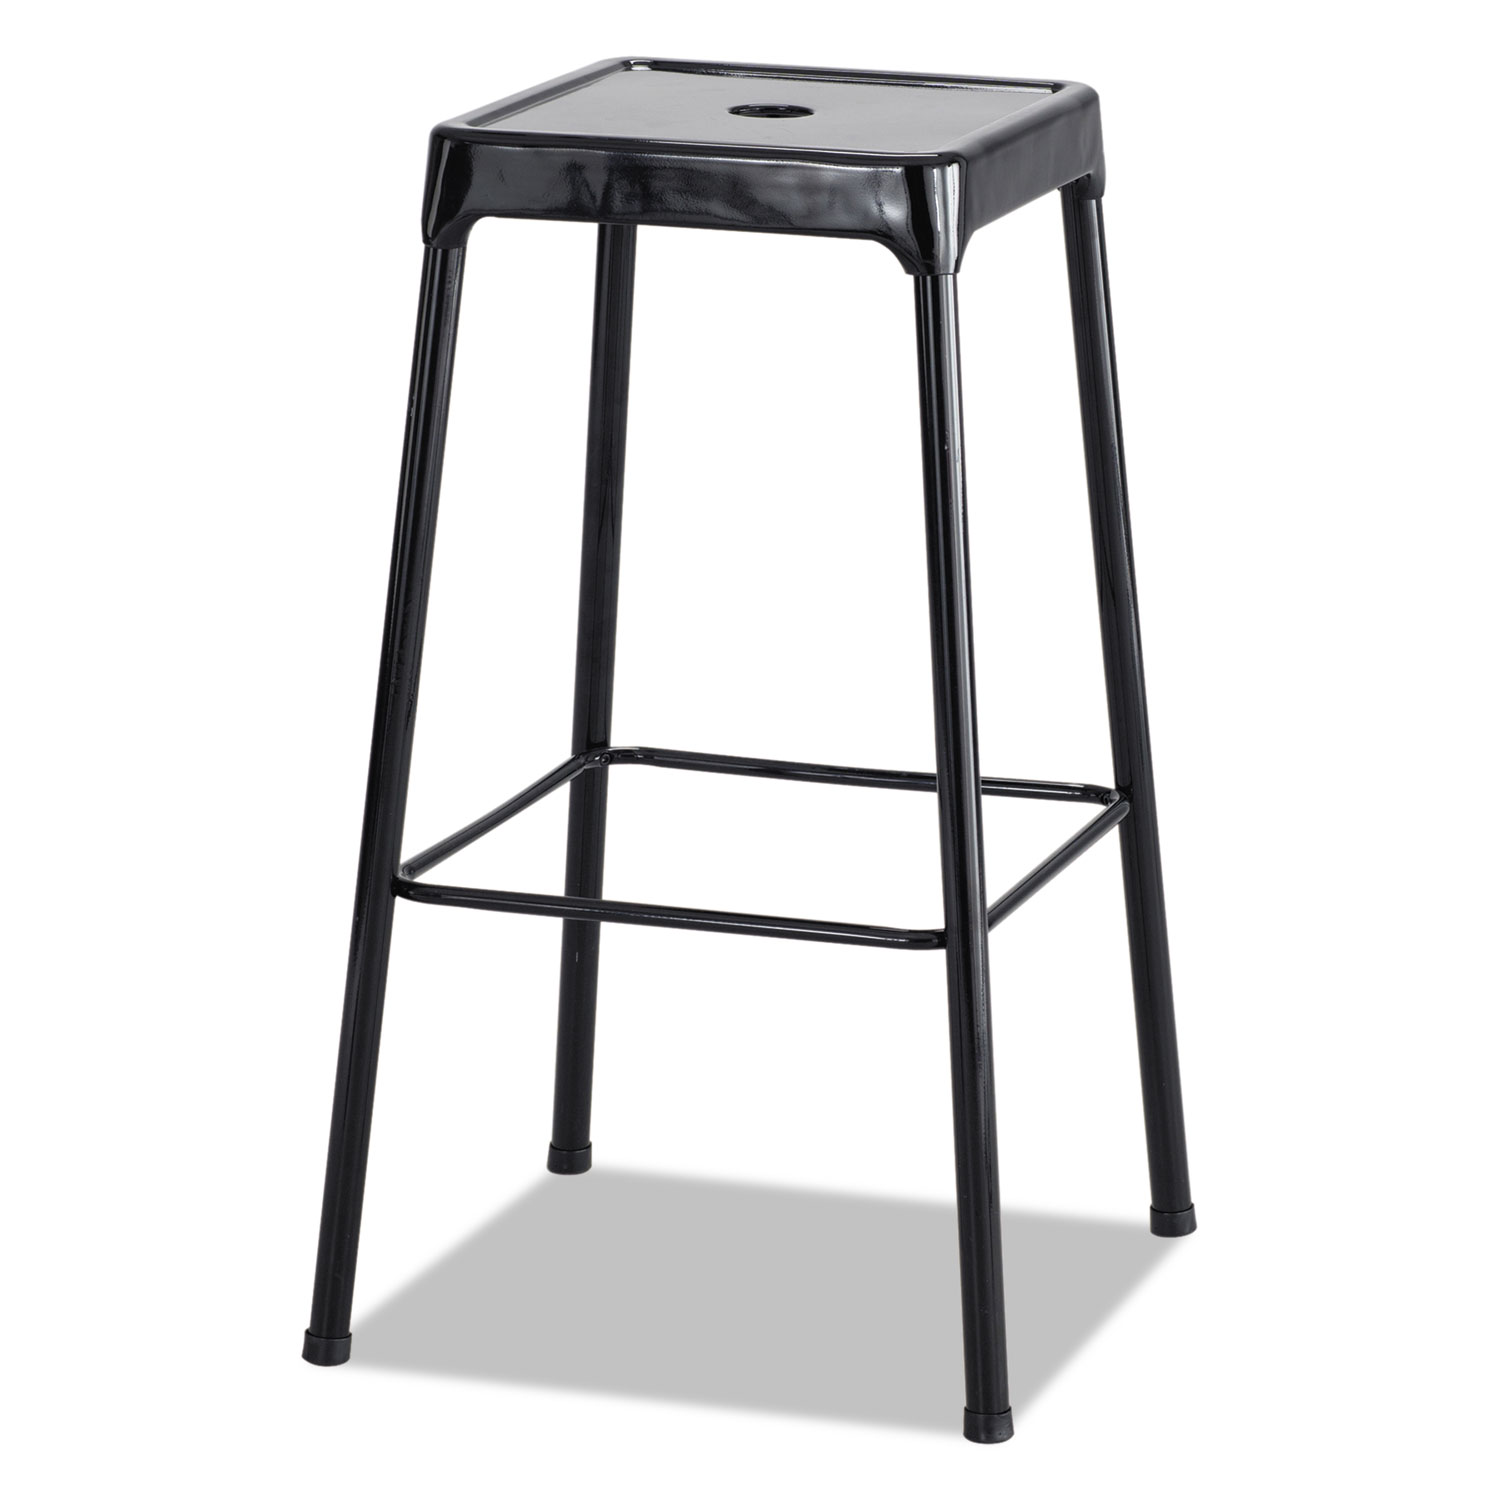  Safco 6606BL Bar-Height Steel Stool, 29 Seat Height, Supports up to 250 lbs., Black Seat/Black Back, Black Base (SAF6606BL) 